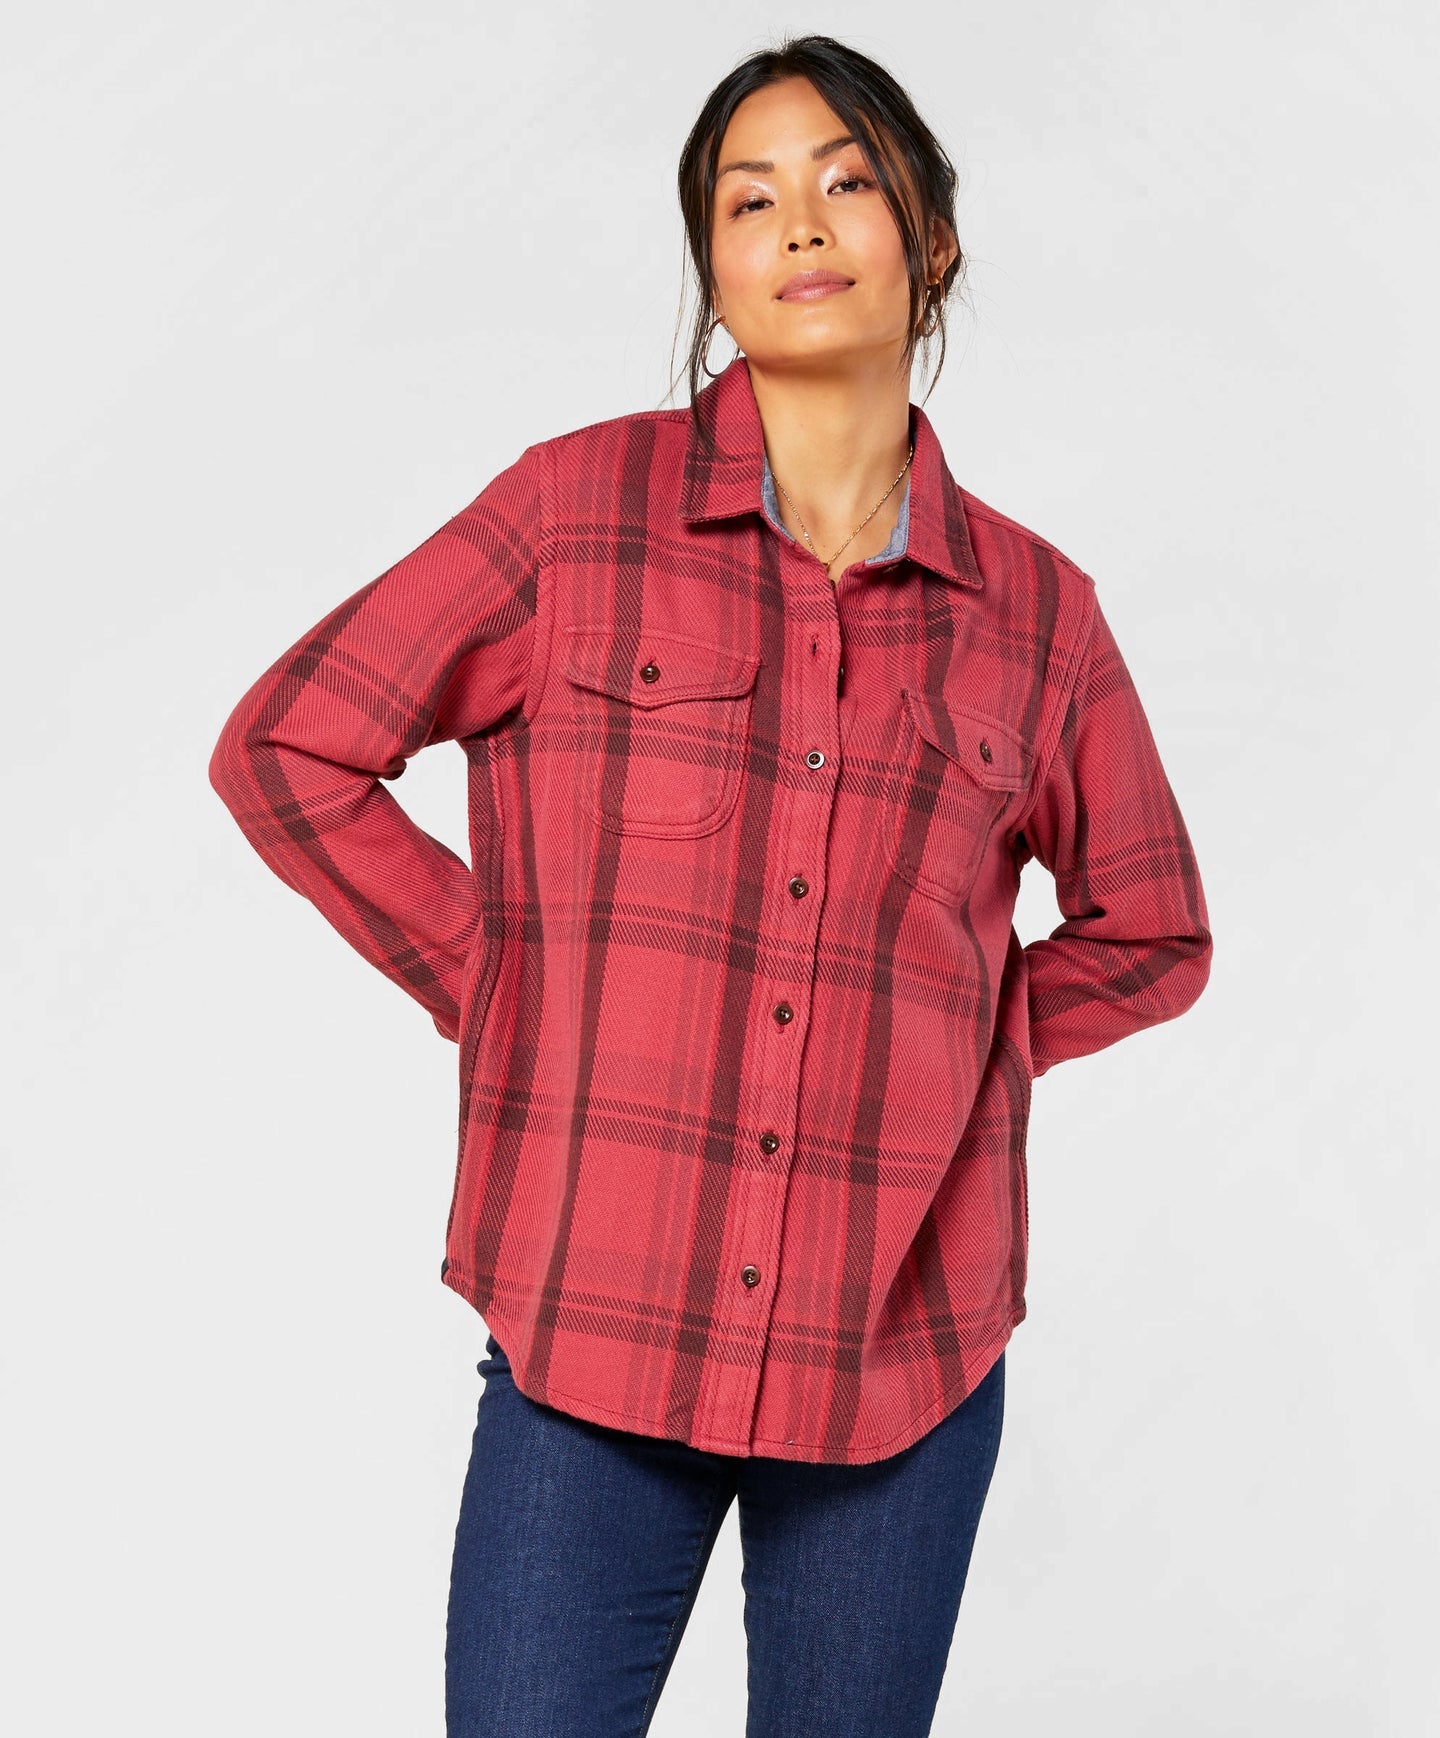 Outerknown Blanket Shirt in Dusty Red Cusco Plaid